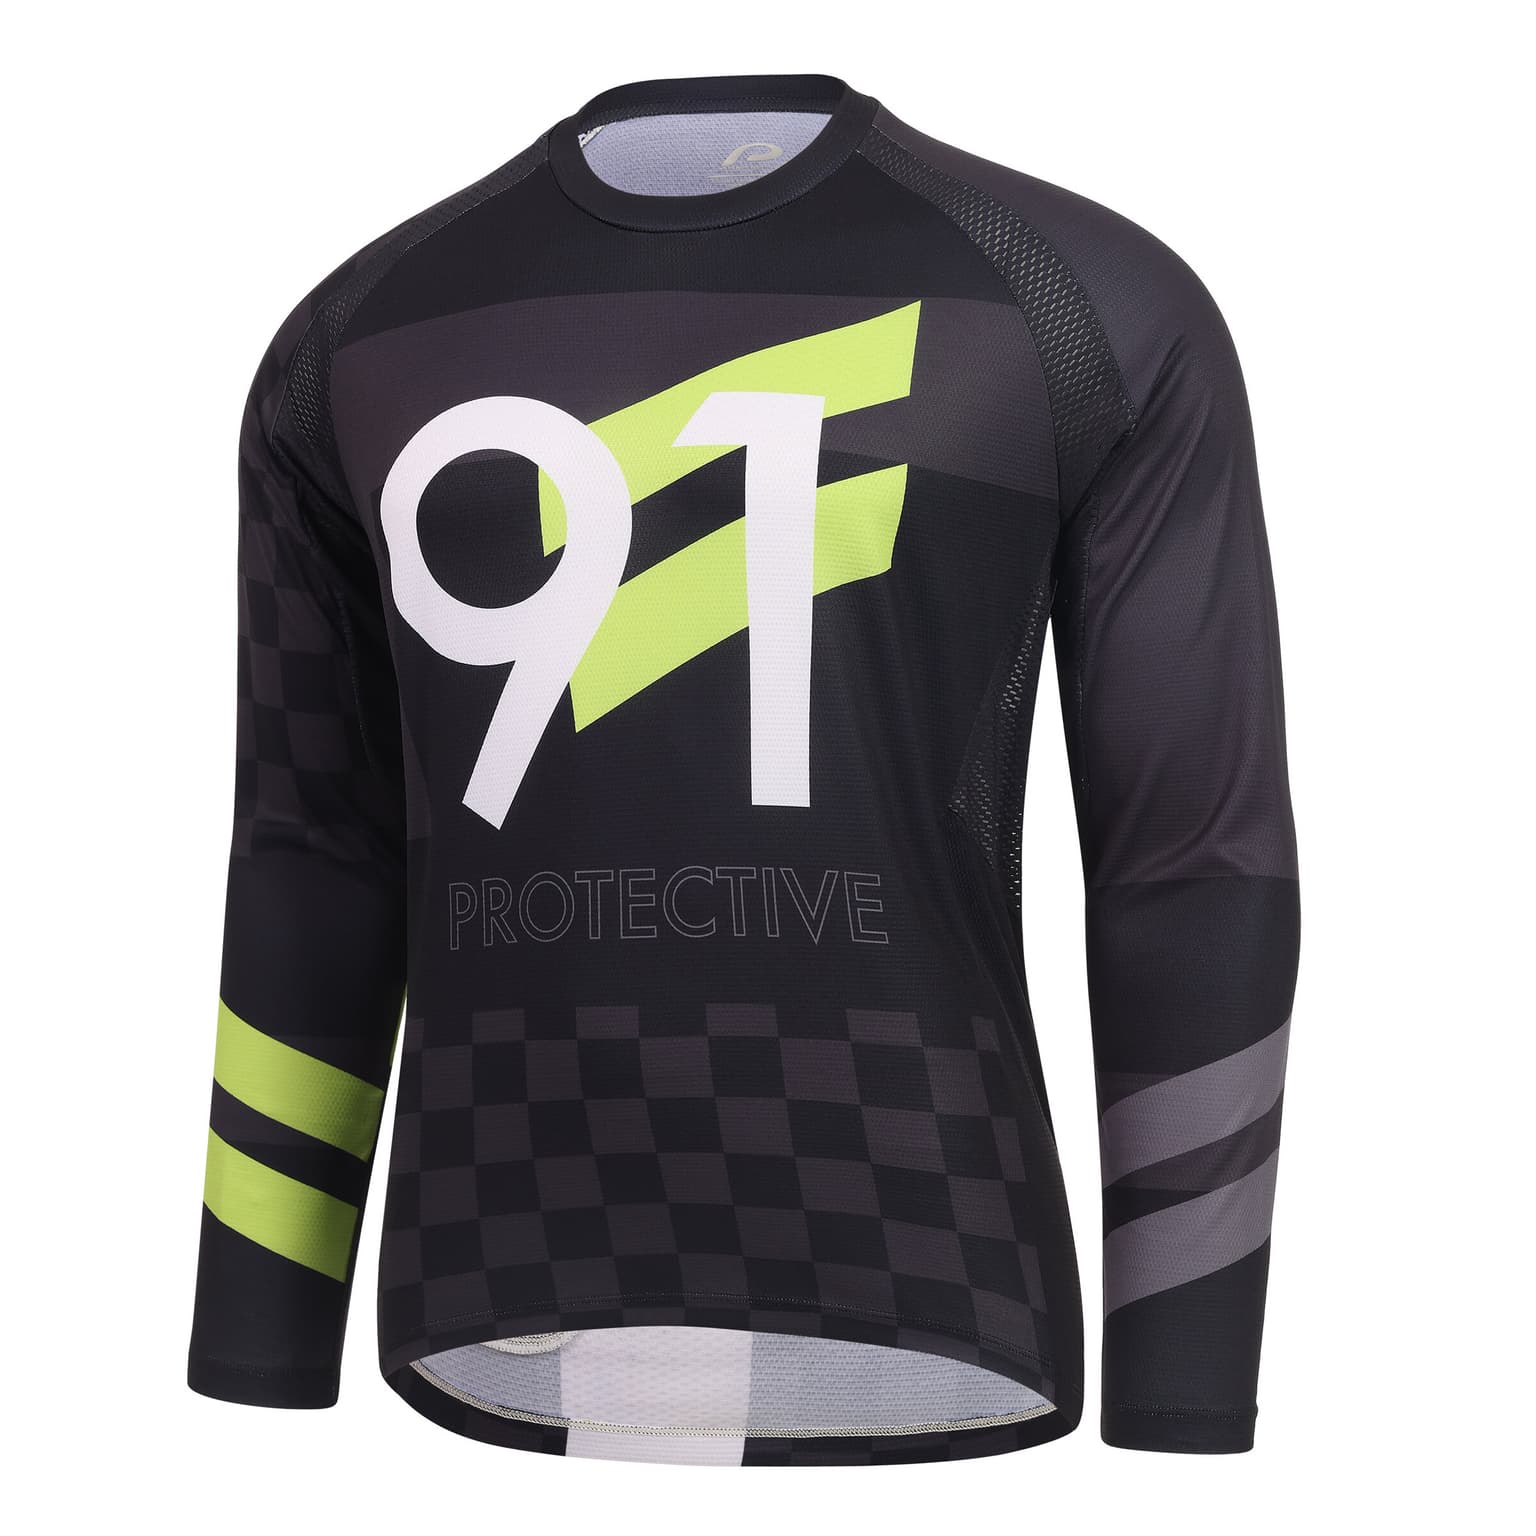 Protective Protective P-SO FLY Bikeshirt antracite 1